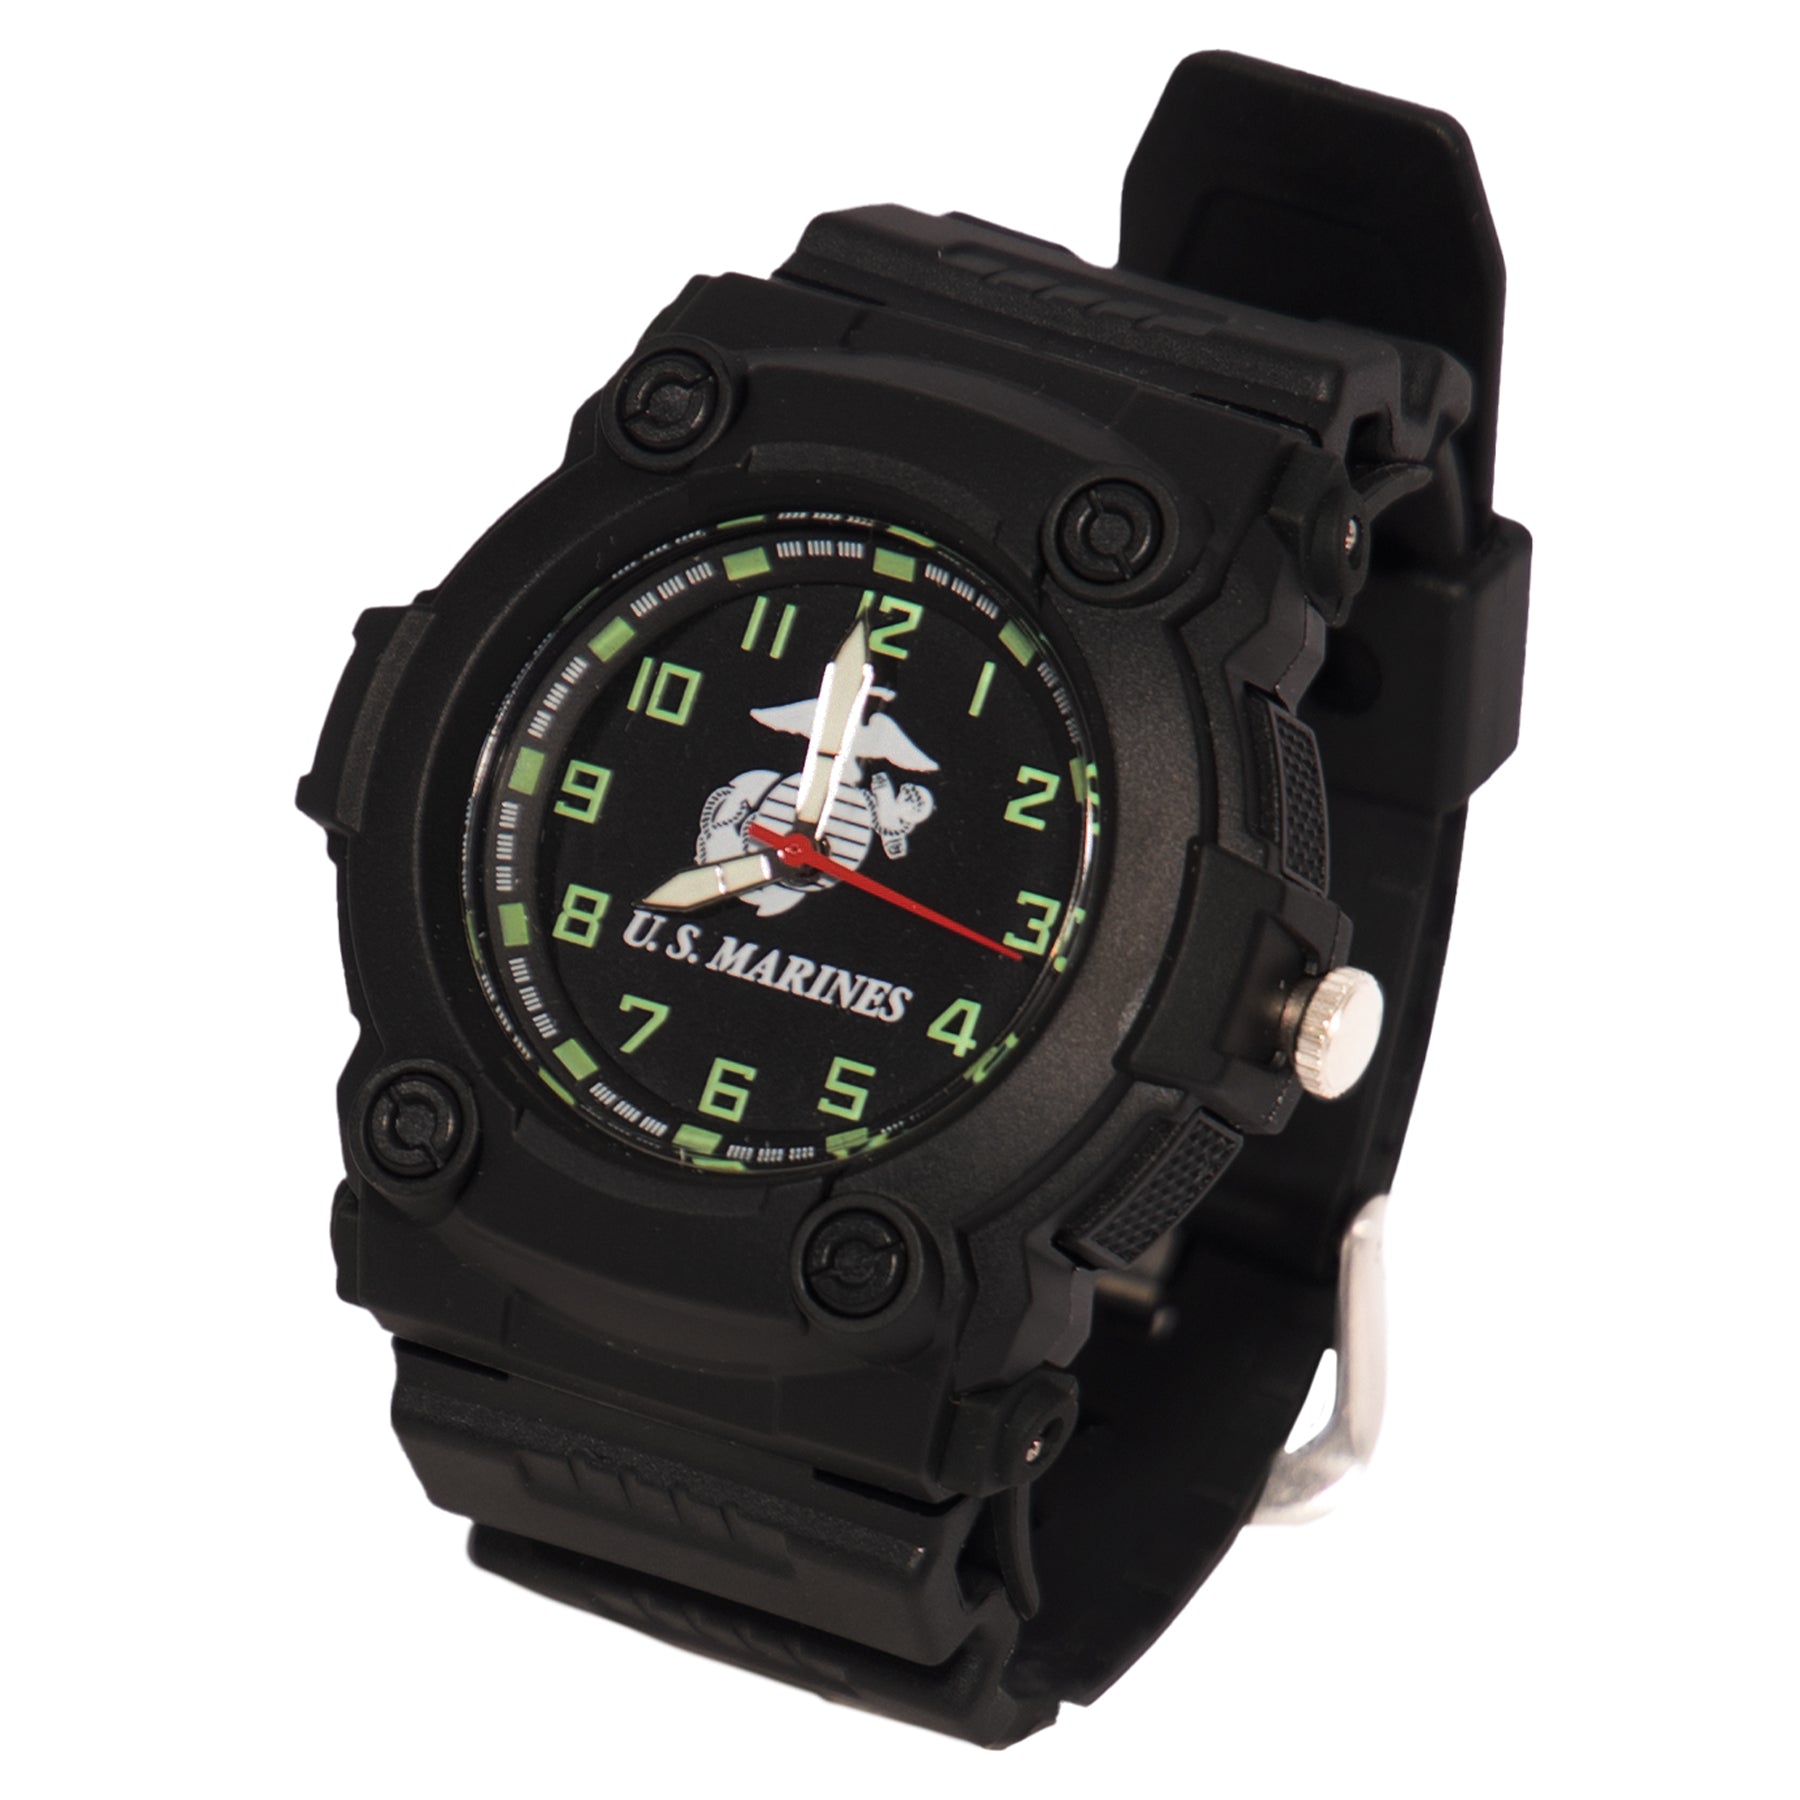 Aquaforce Marines Watch Watches MilTac Tactical Military Outdoor Gear Australia